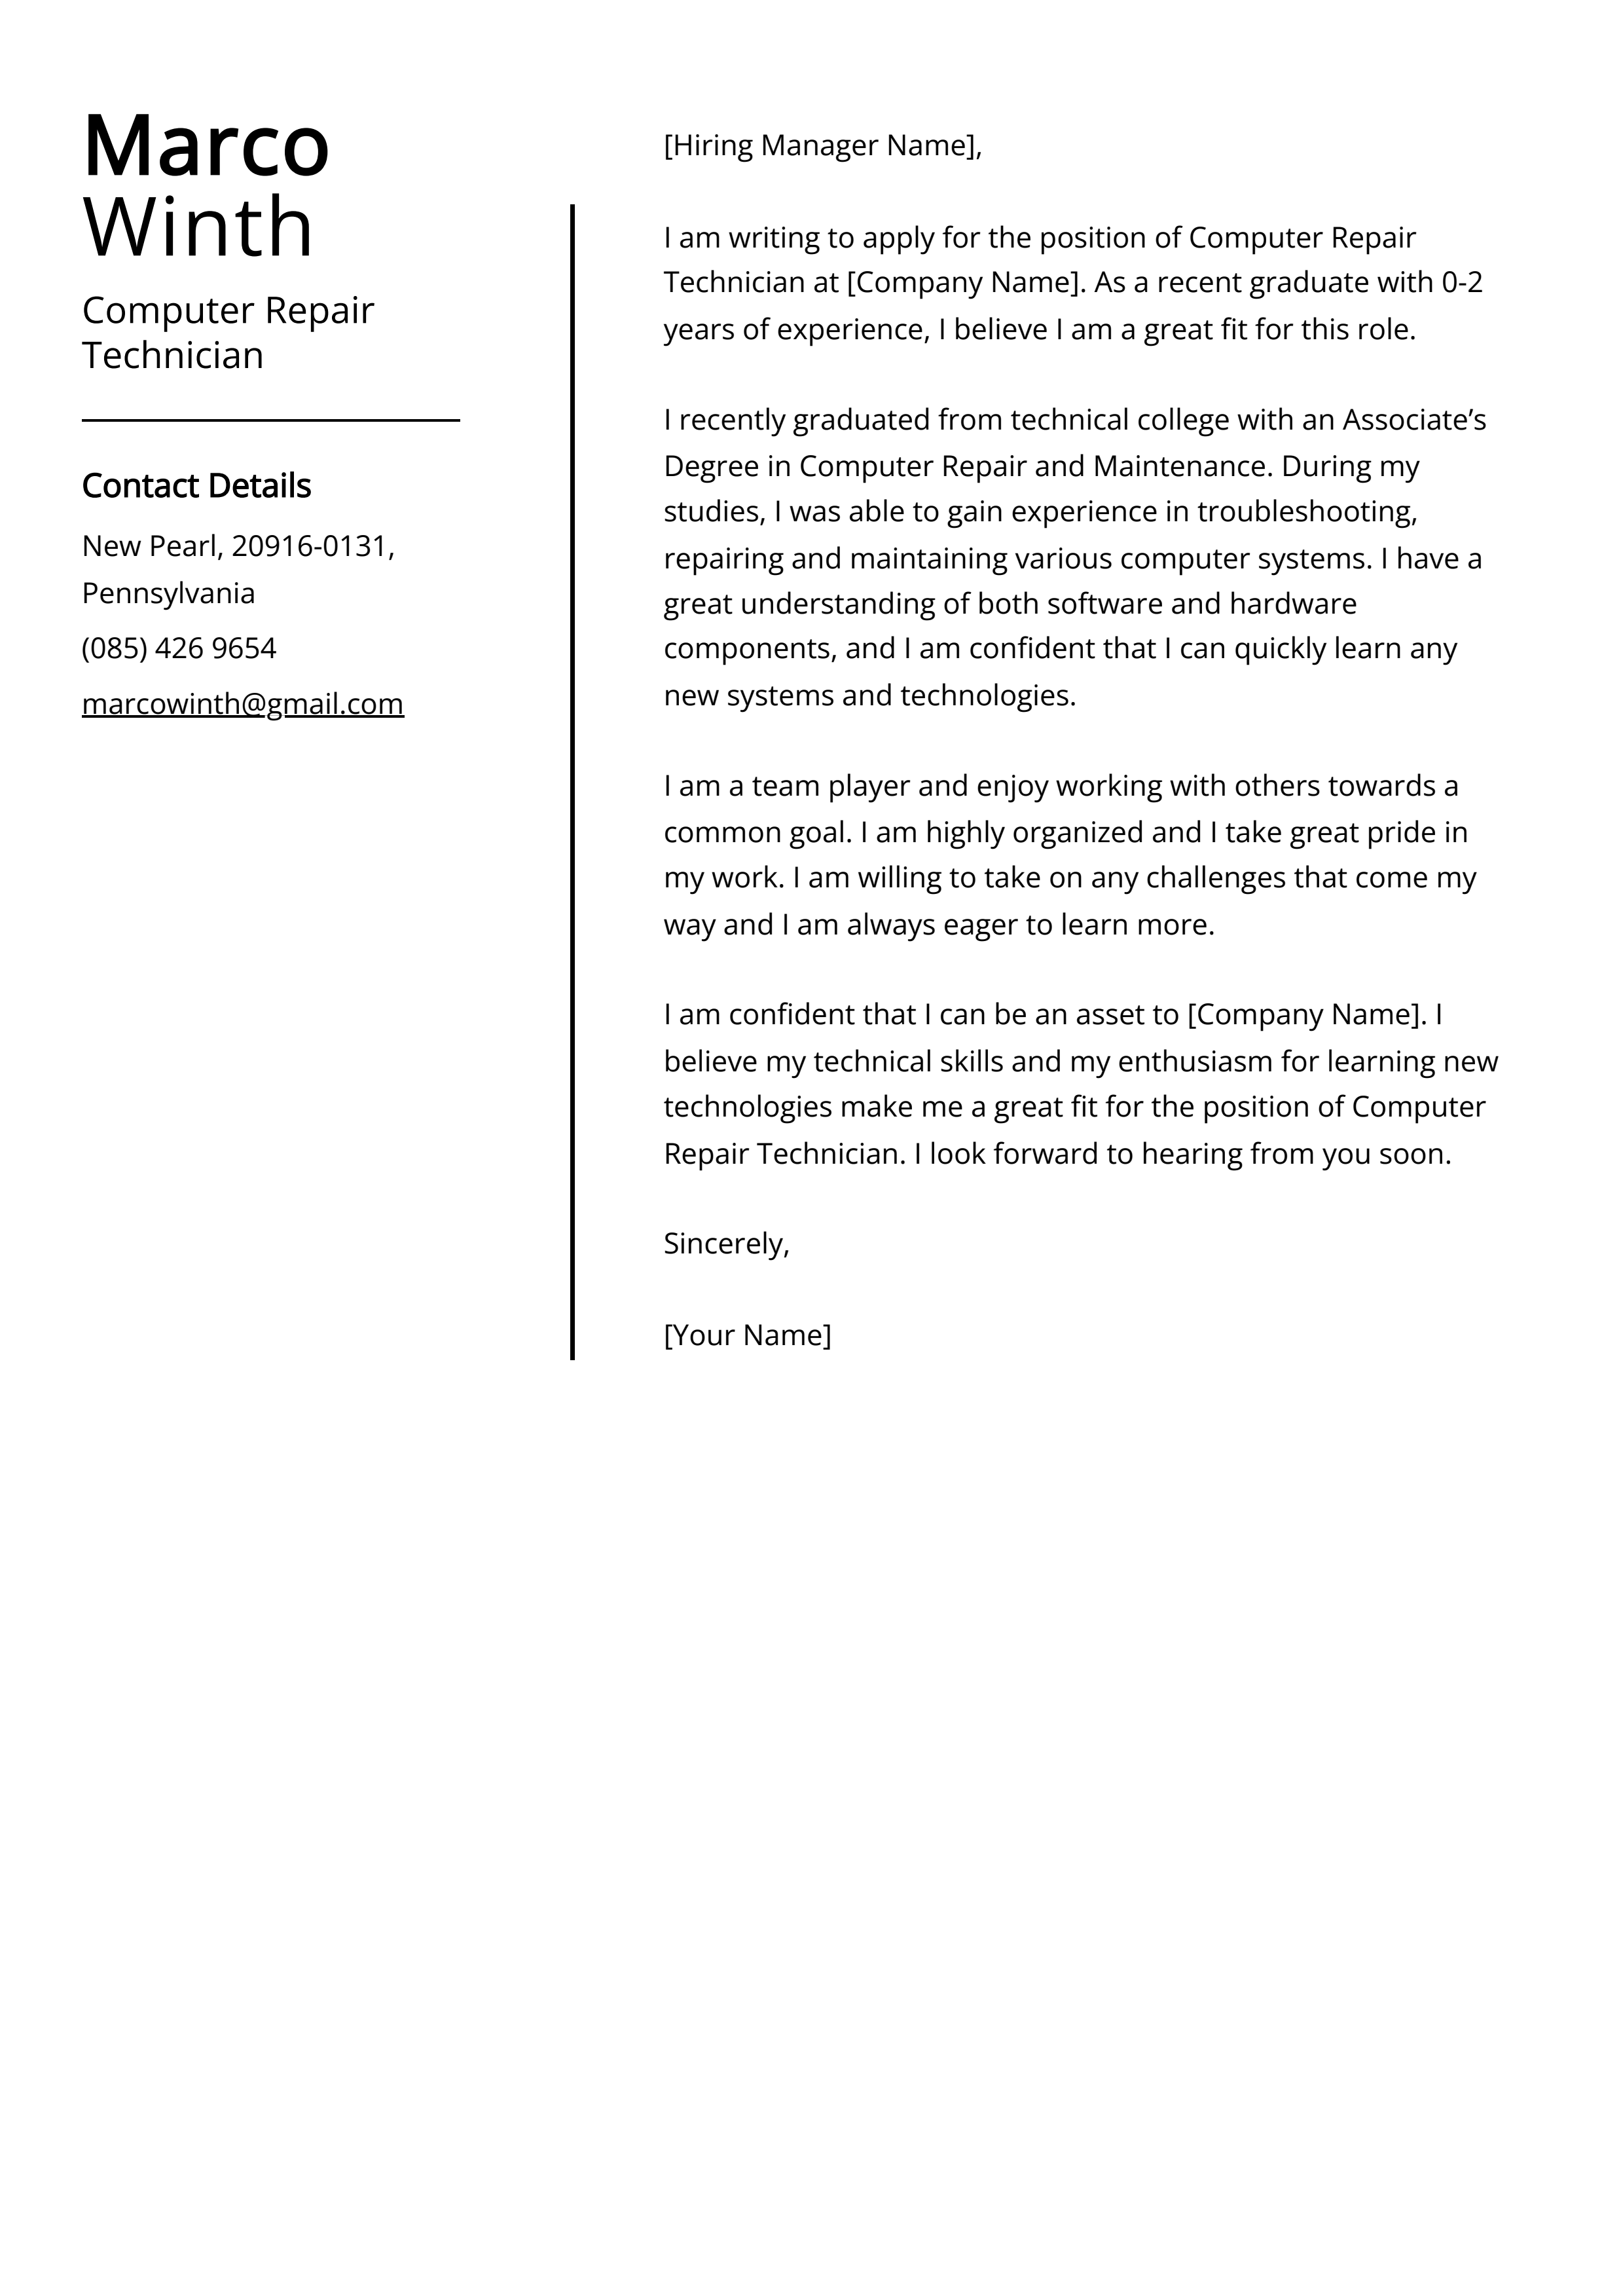 Computer Repair Technician Cover Letter Example